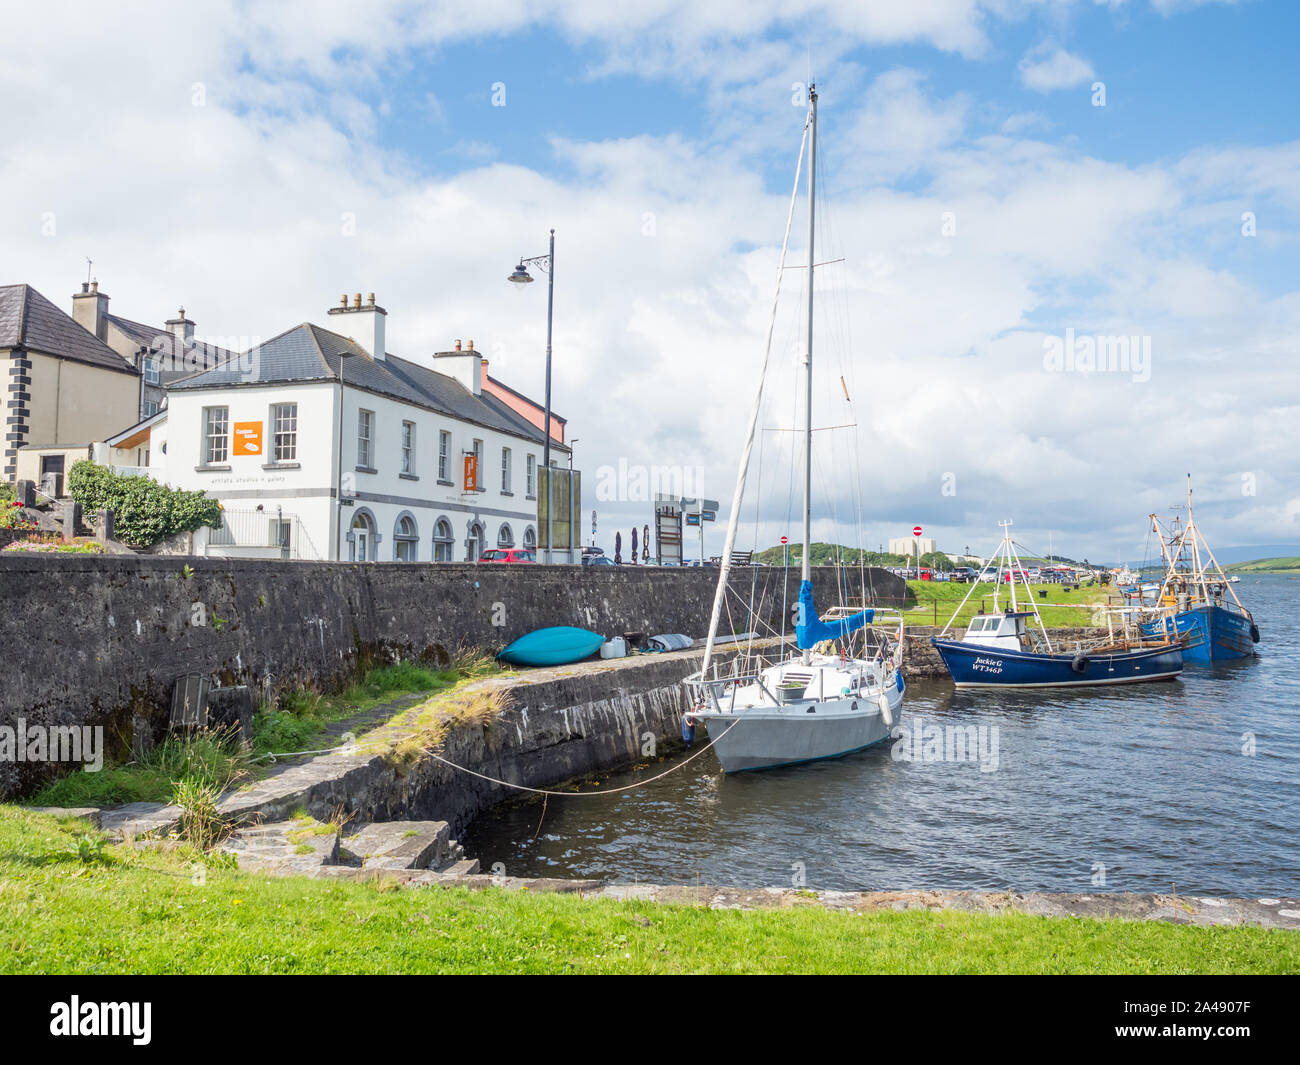 WESTPORT, IRELAND - AUGUST 7, 2019: Boats lined up at Westport Harbour in County Mayo, Ireland. Stock Photo